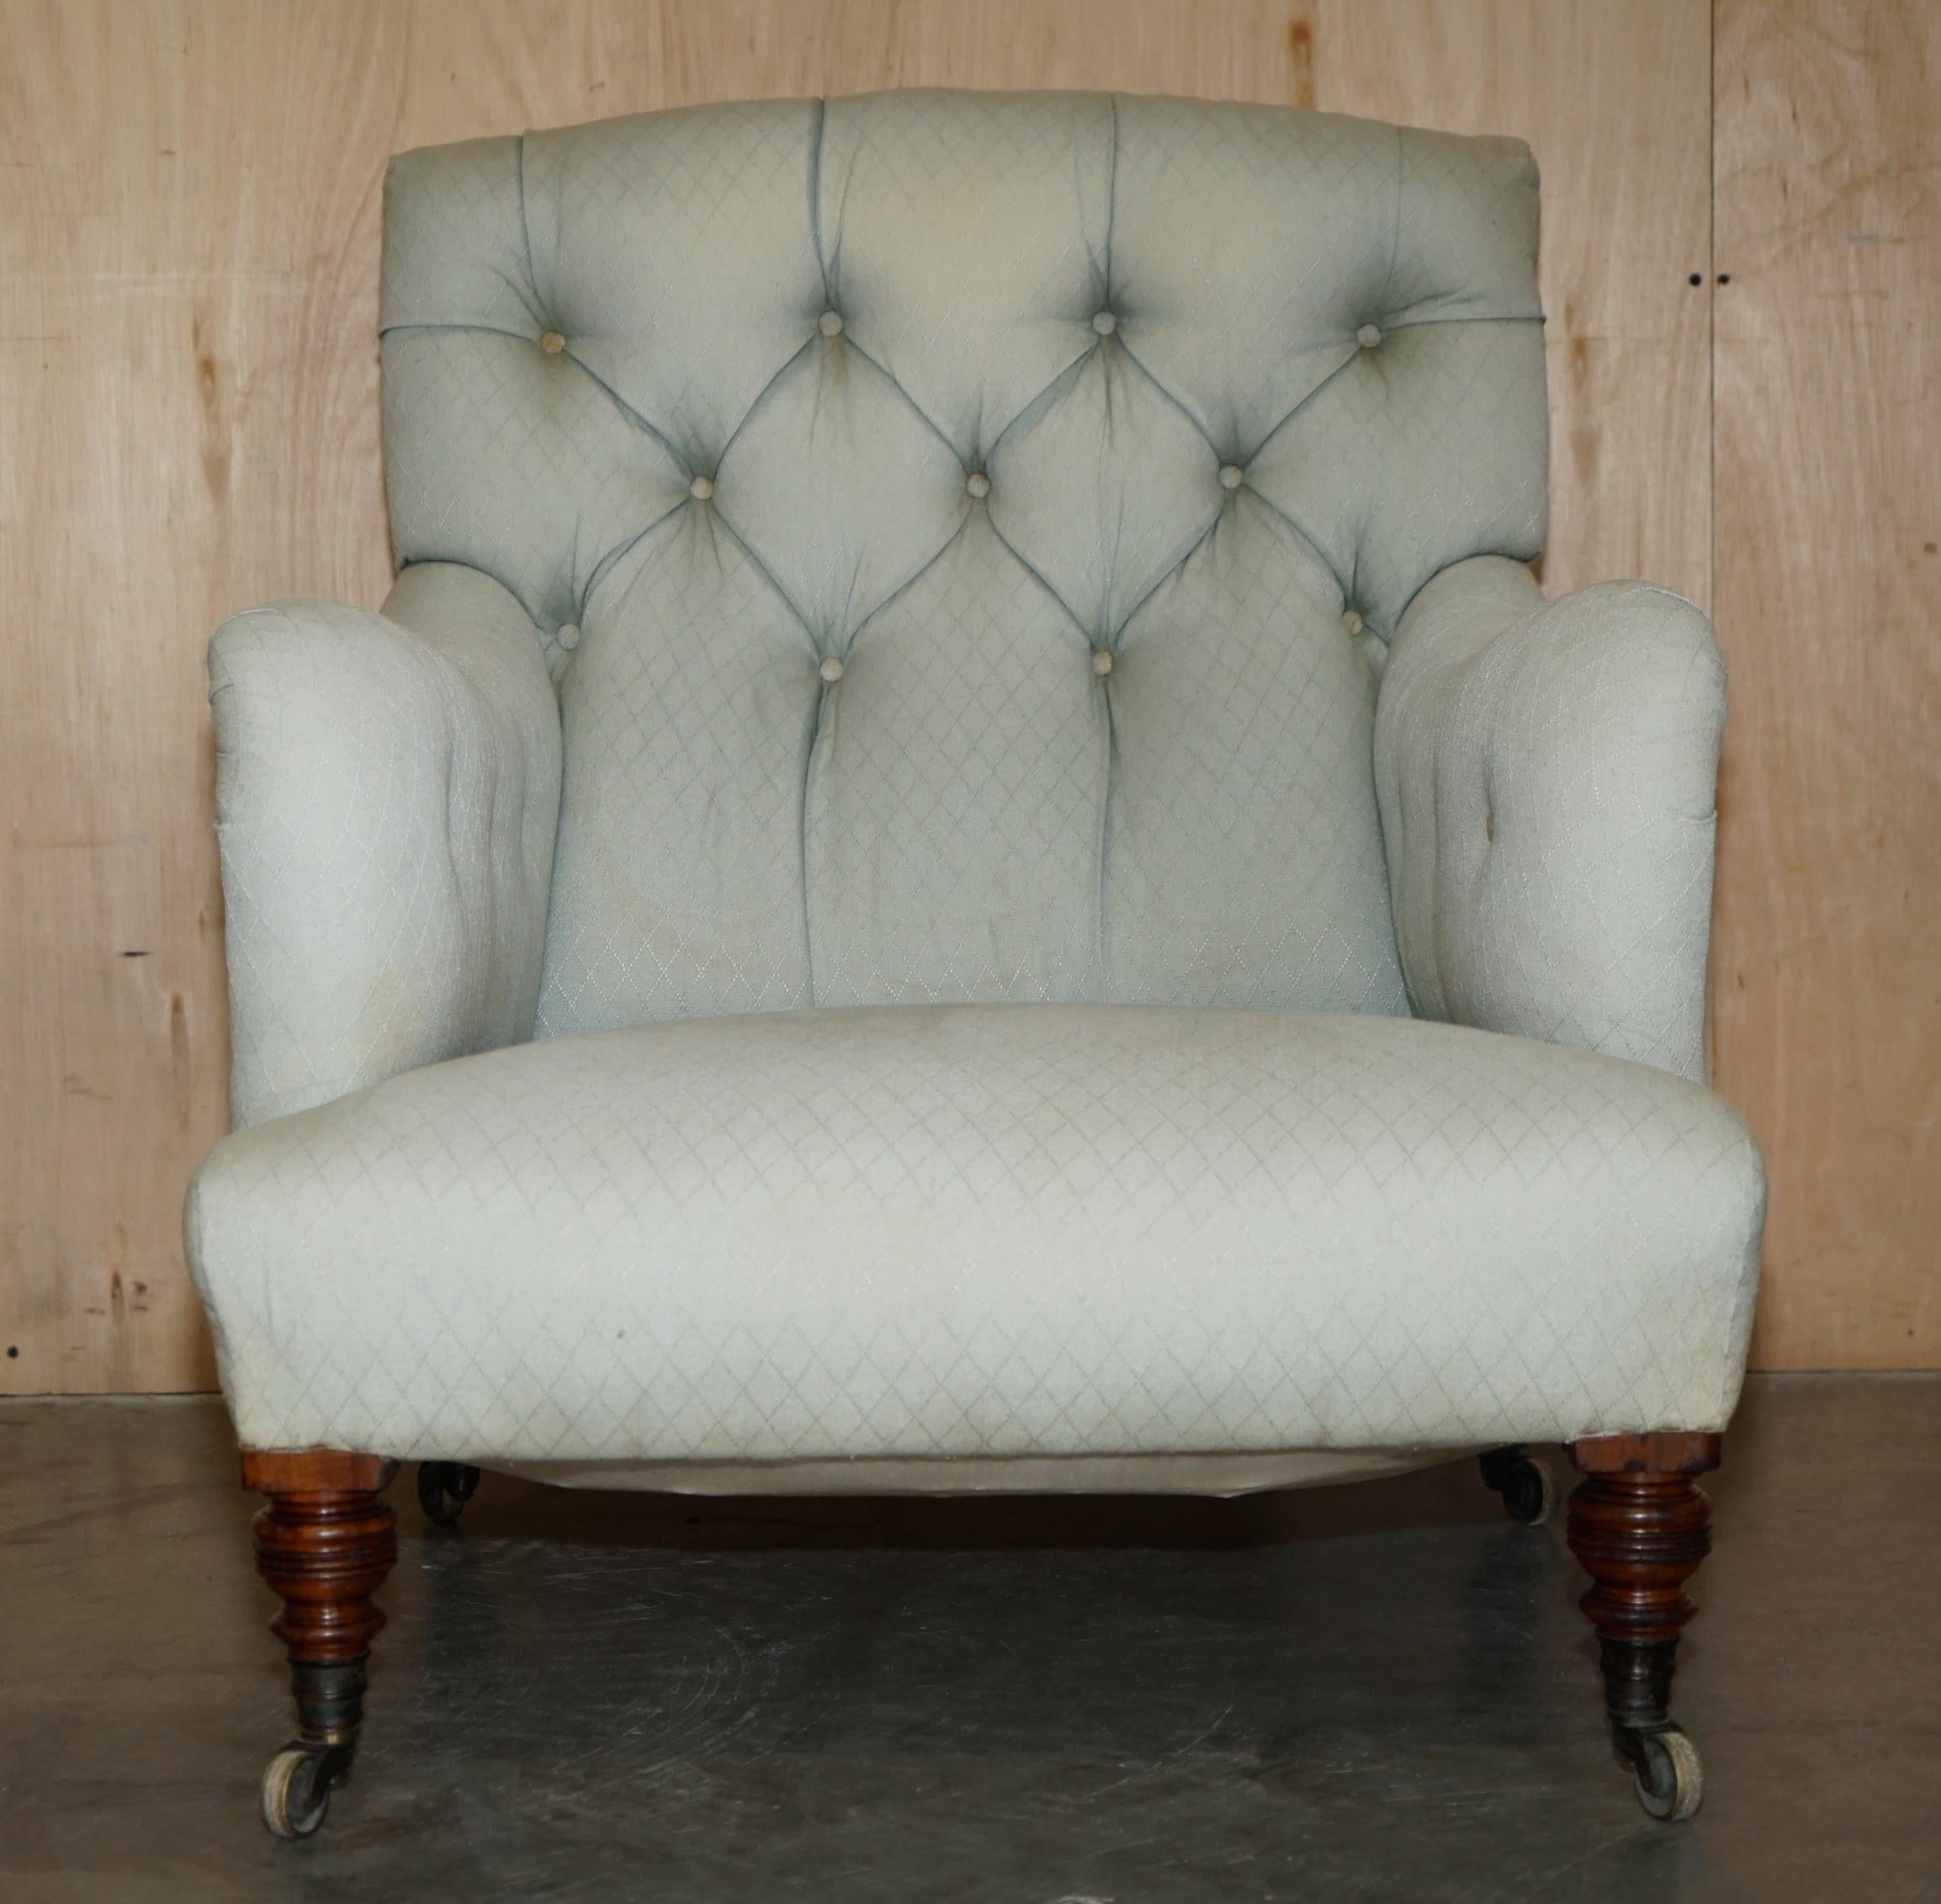 19th Century RARE ORIGINAL ViCTORIAN HOWARD & SONS BRIDGEWATER ARMCHAIR PERIOD UPHOLSTERY For Sale